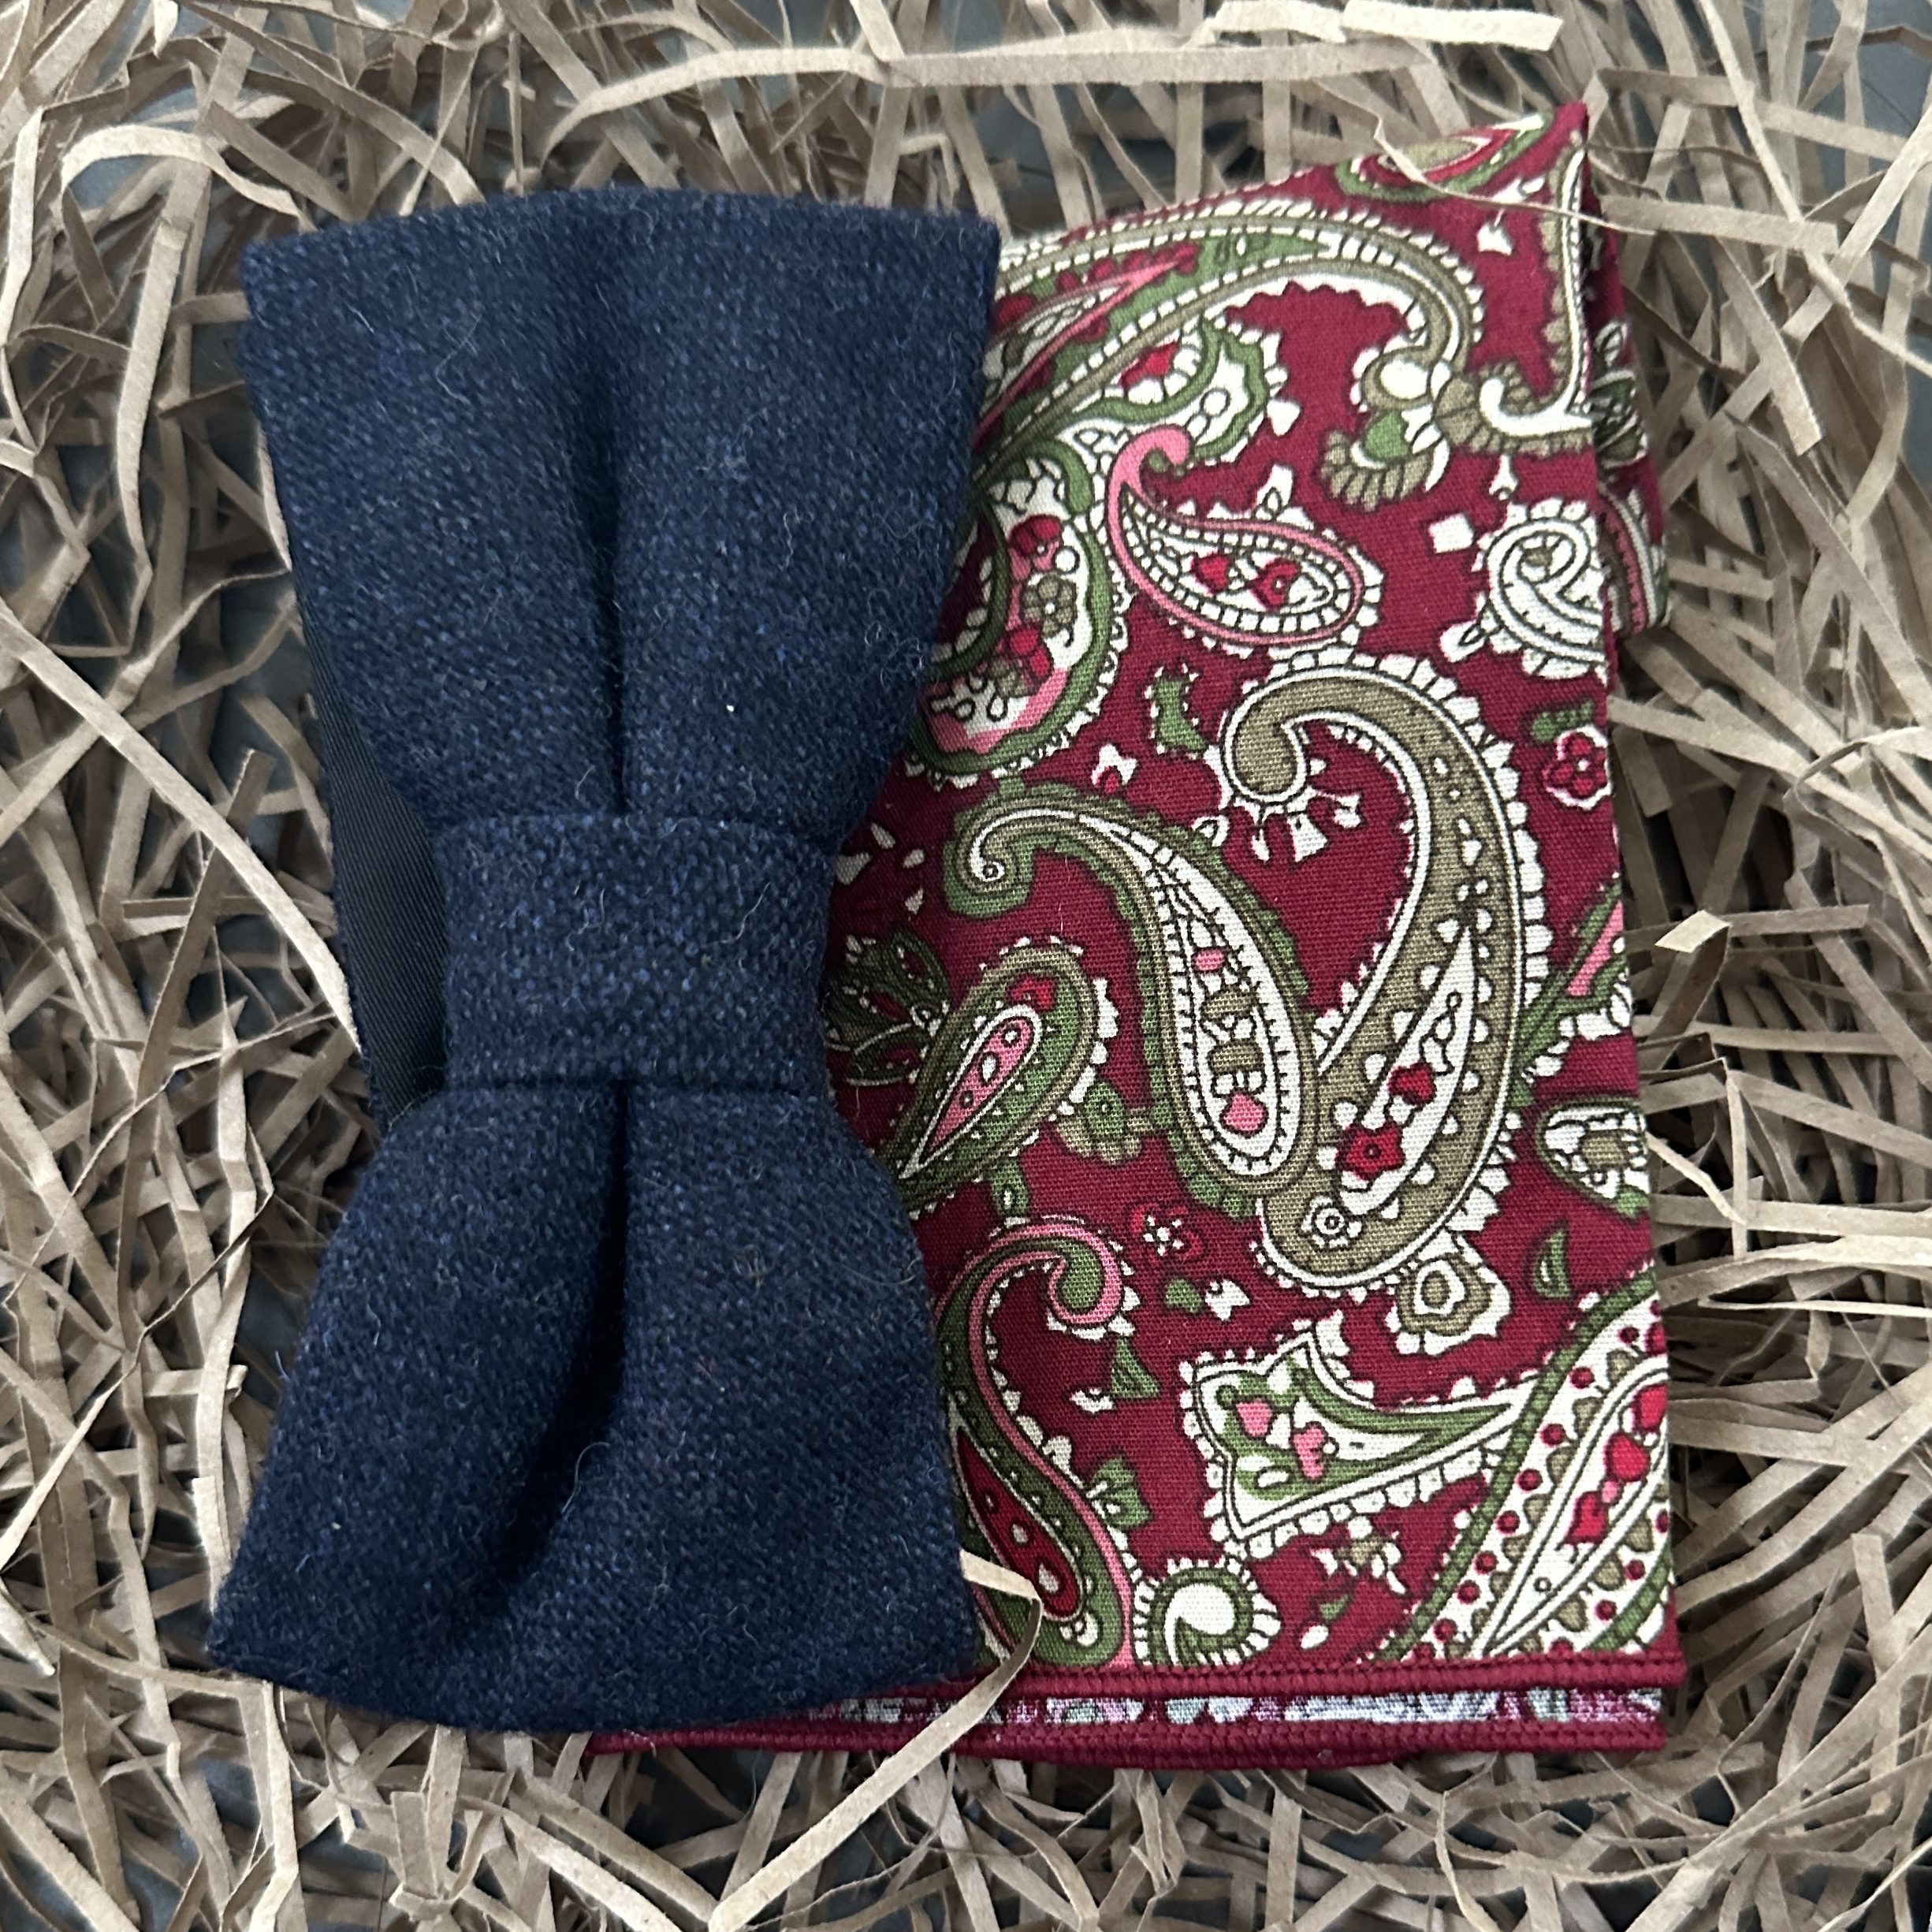 A blue wool bow tie and paisley red pocket square for weddings, groomsmen gifts and mens gifts